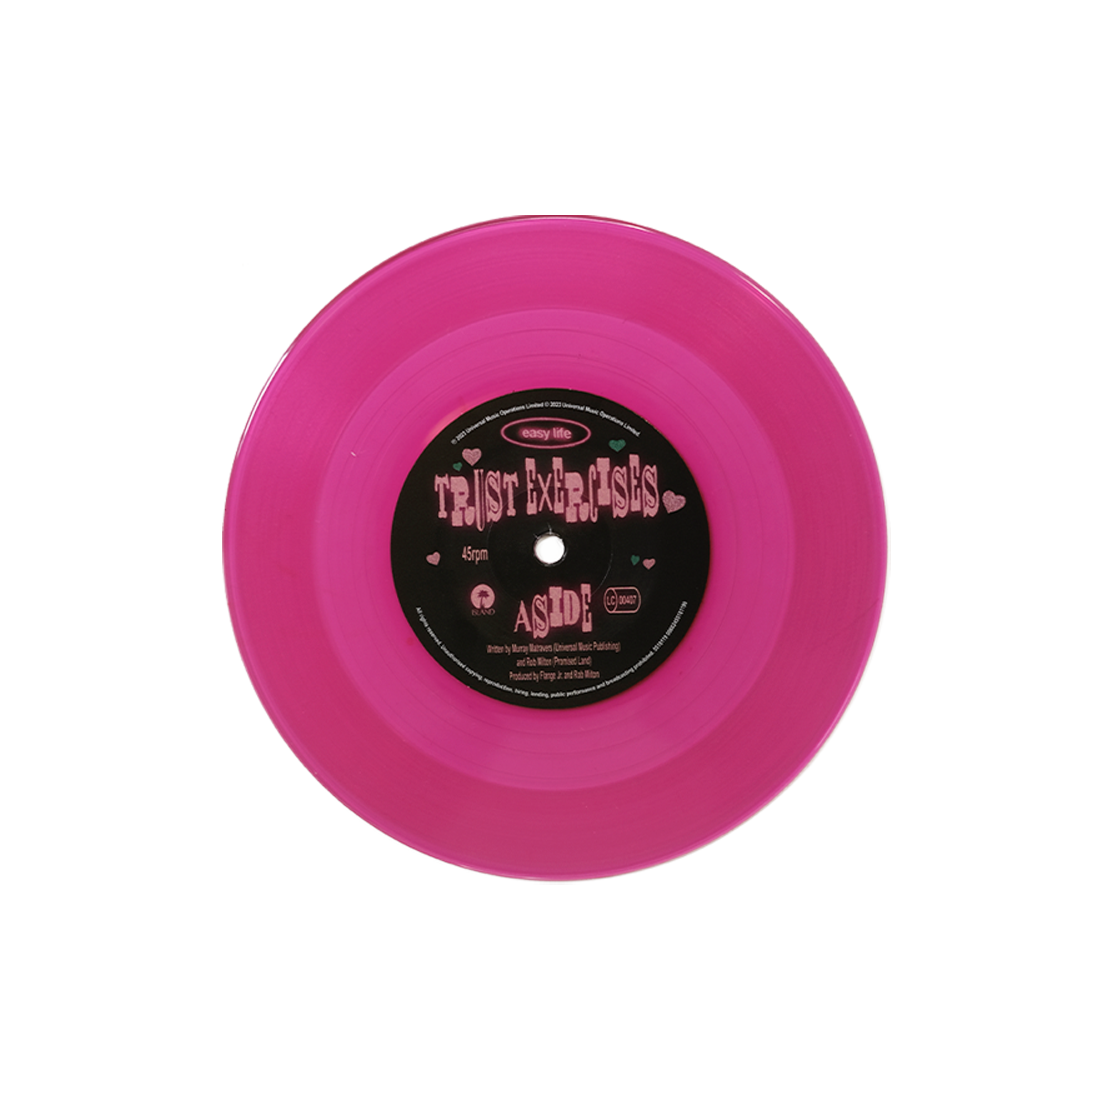 easy life - Trust Exercises 7” Pink Limited Edition Vinyl (Alternative Version)